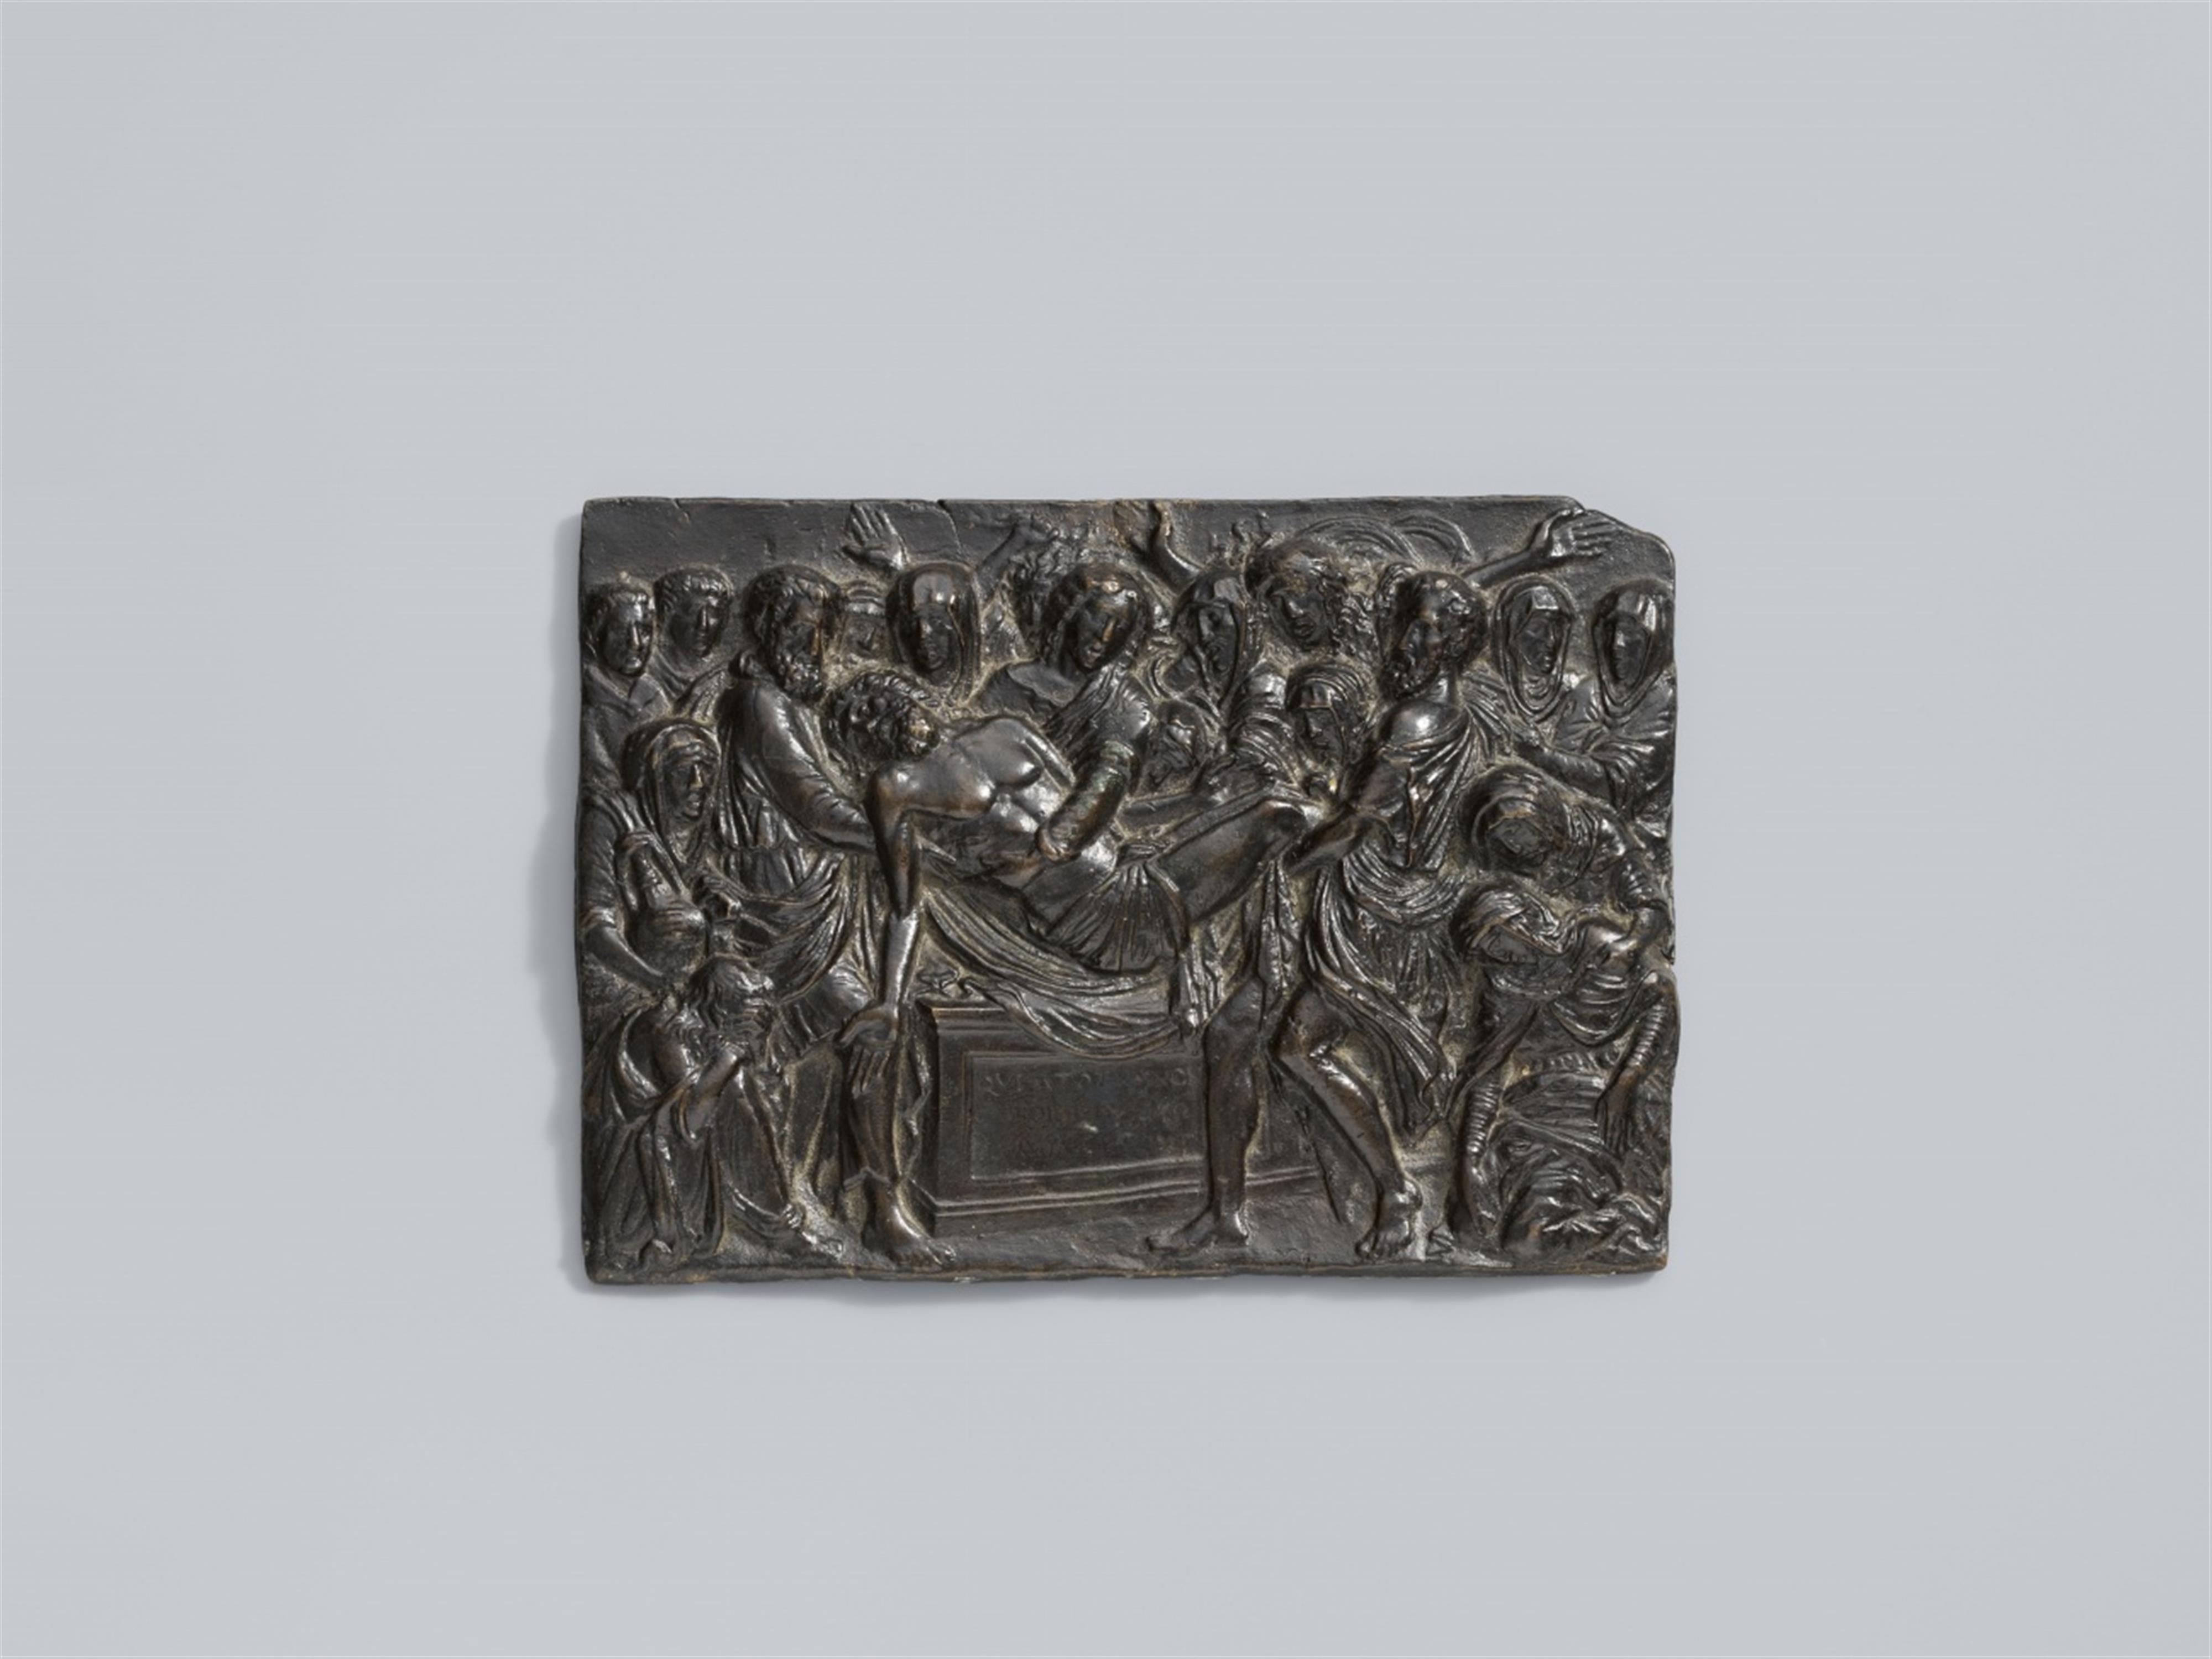 Italy 16th century - A 16th century Italian relief depicting the entombment - image-1